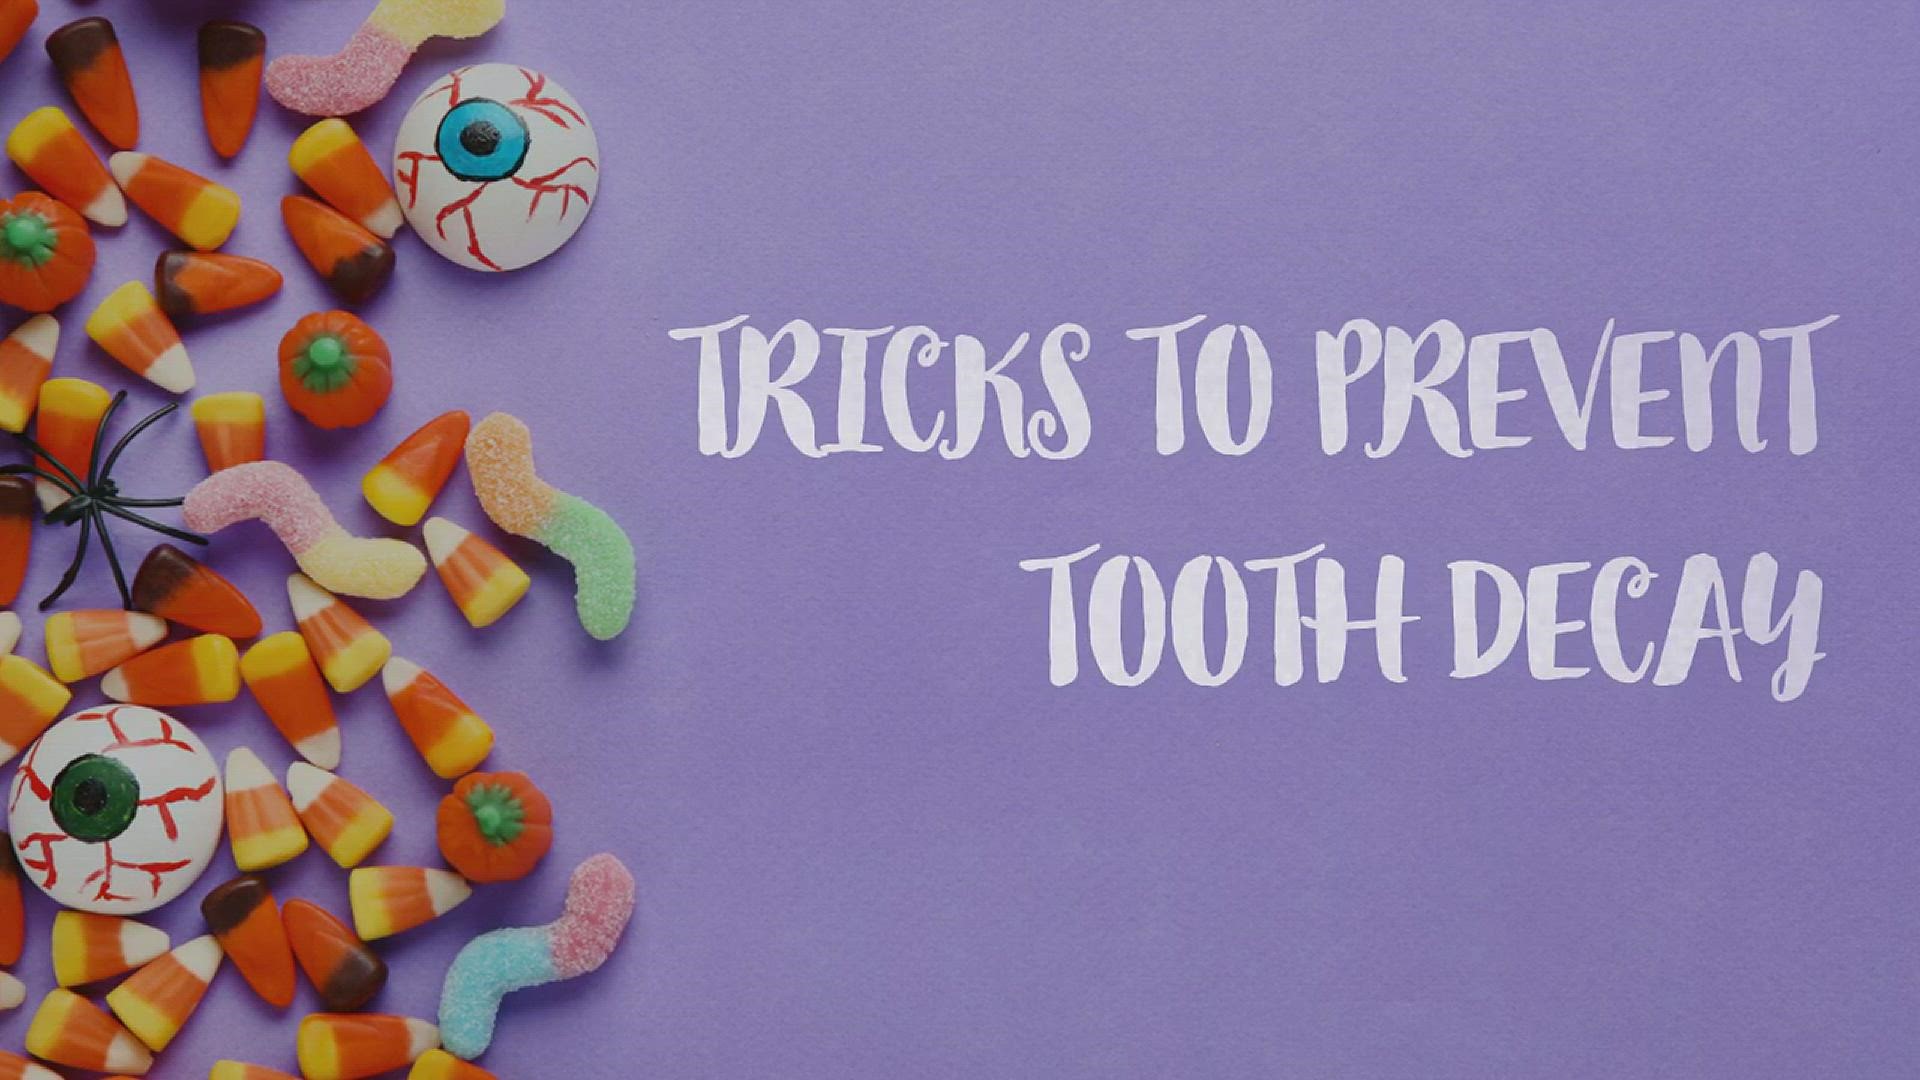 Tricks to help you prevent tooth decay from Halloween treats this year.